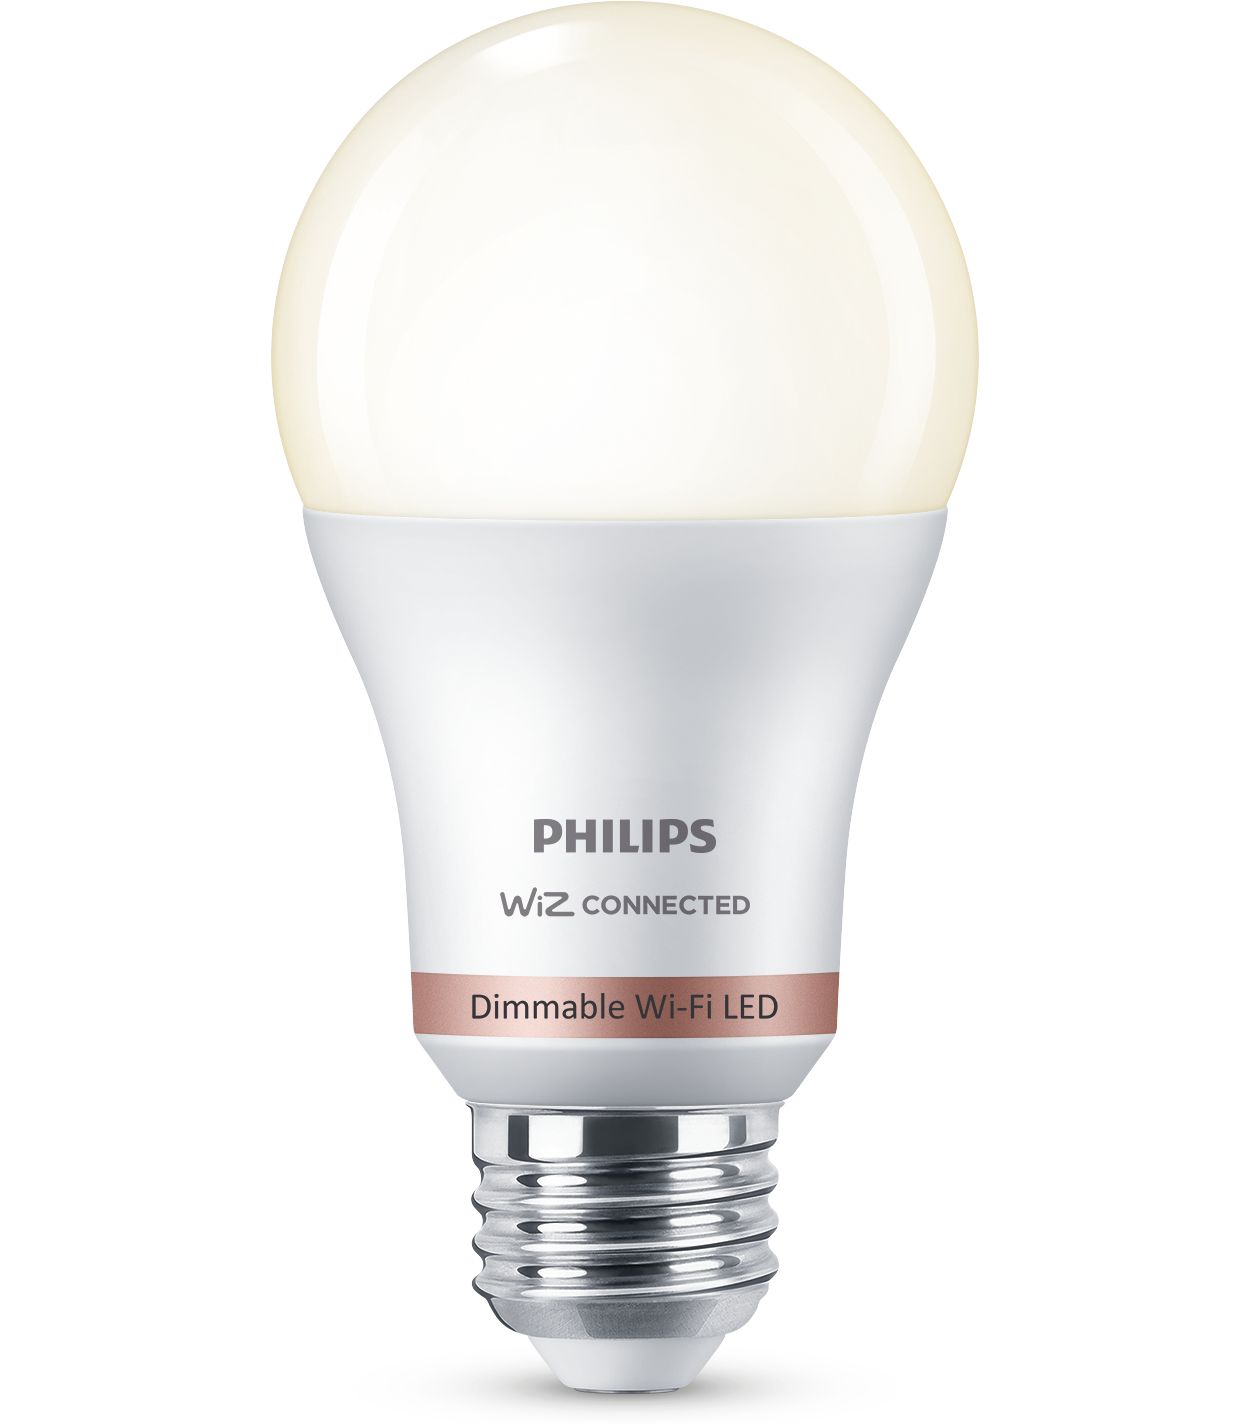 Easy-to-use smart dimmable bulb